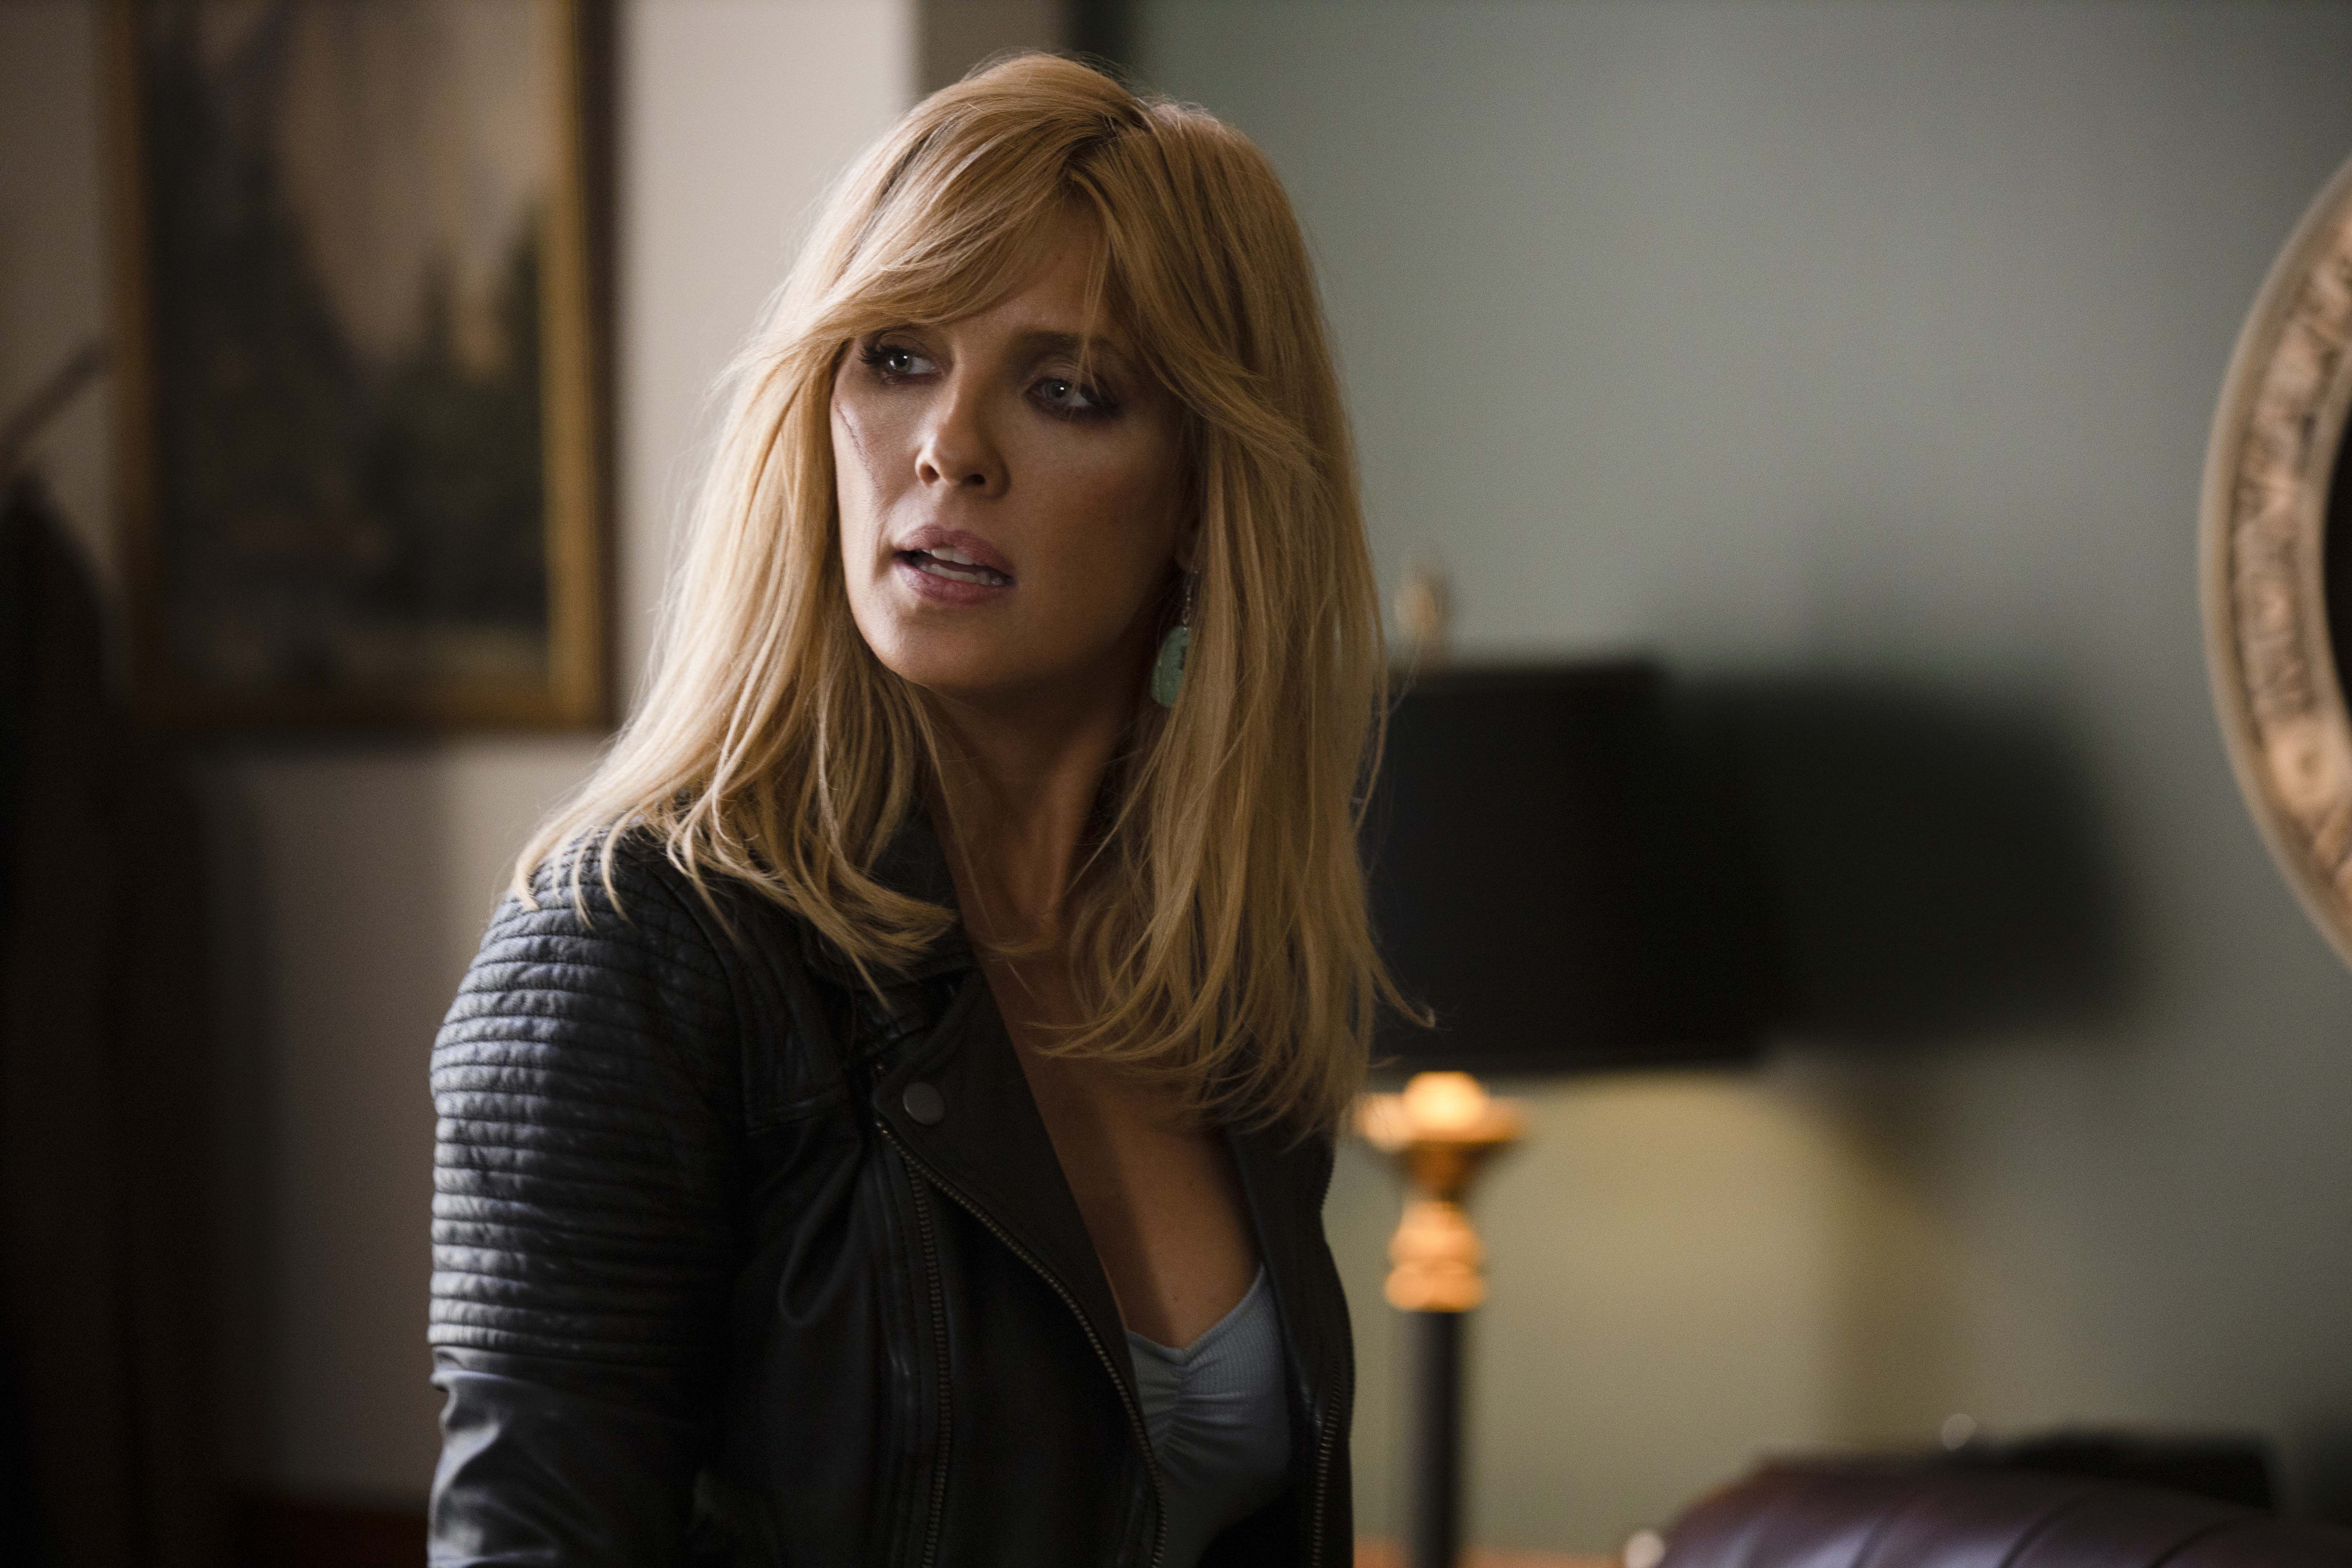 Kelly reilly leaked